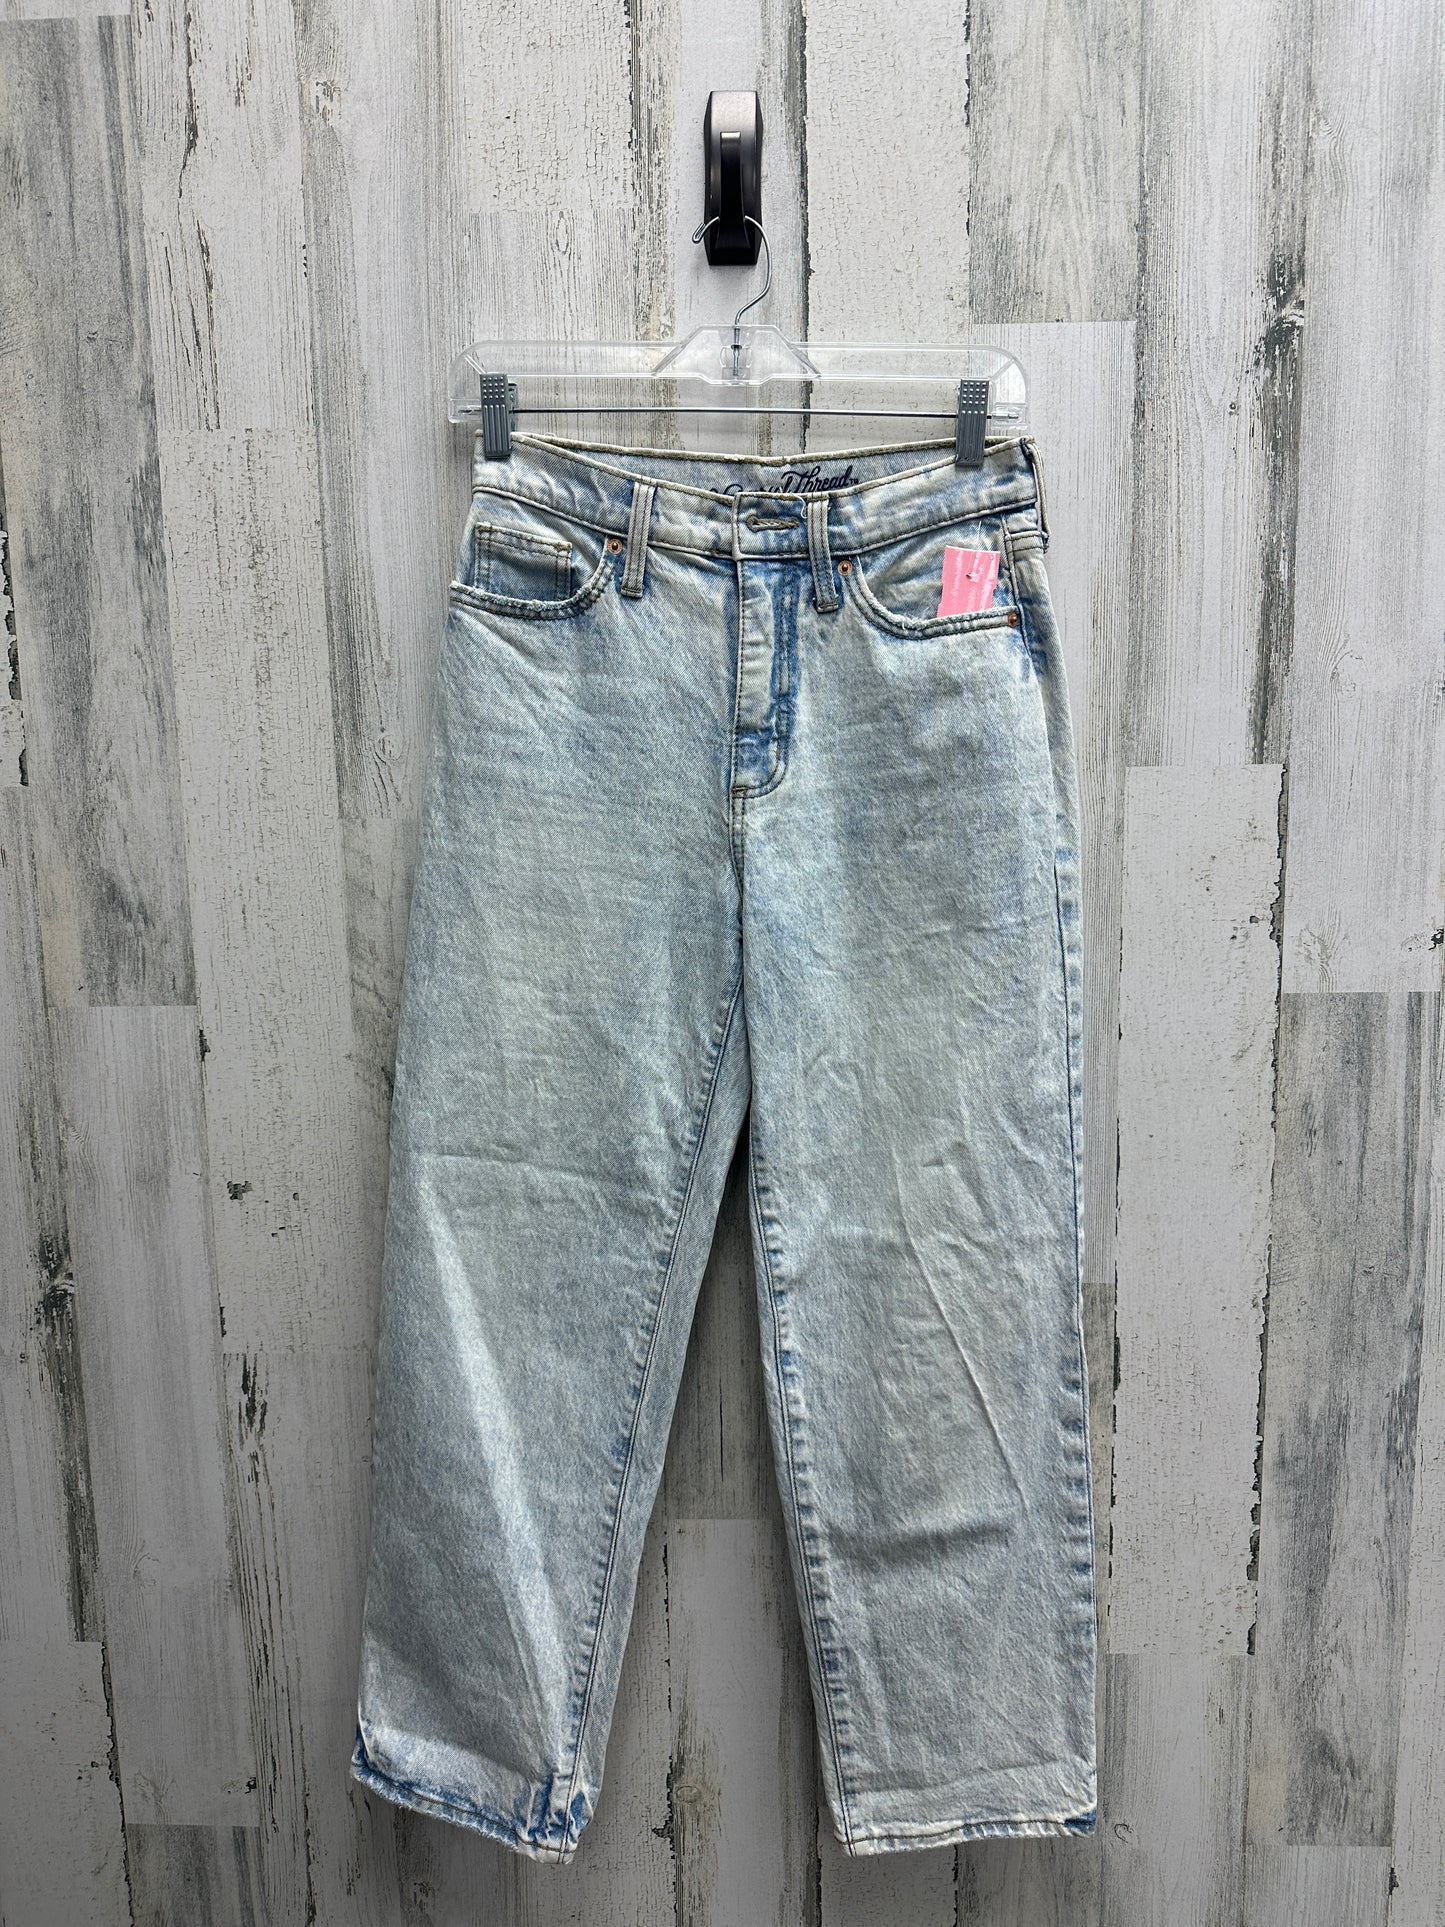 Jeans Relaxed/boyfriend By Universal Thread  Size: 0